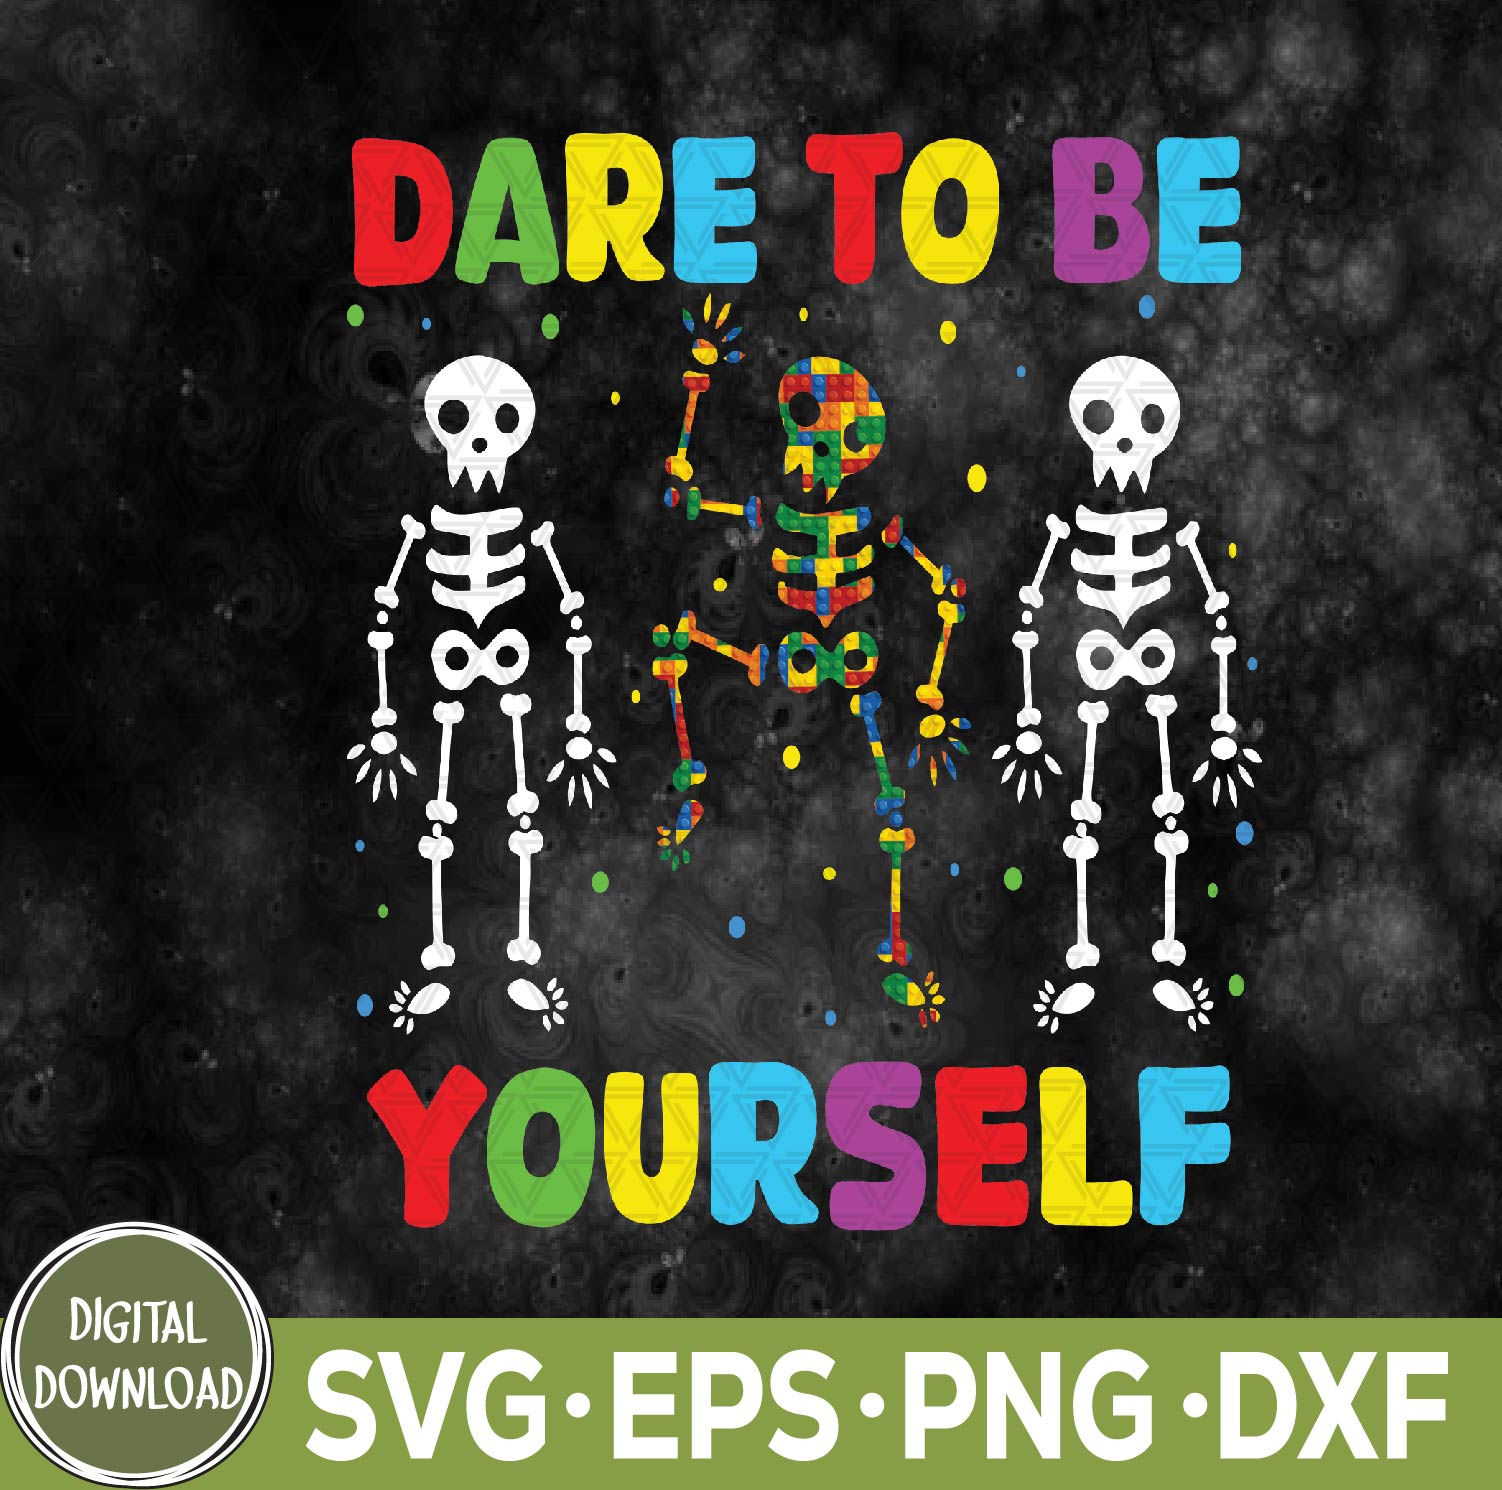 WTMNEW9file 09 36 Autism Awareness Svg, Skeleton Dabbing Dare To Be Yourself Svg, Eps, Png, Dxf